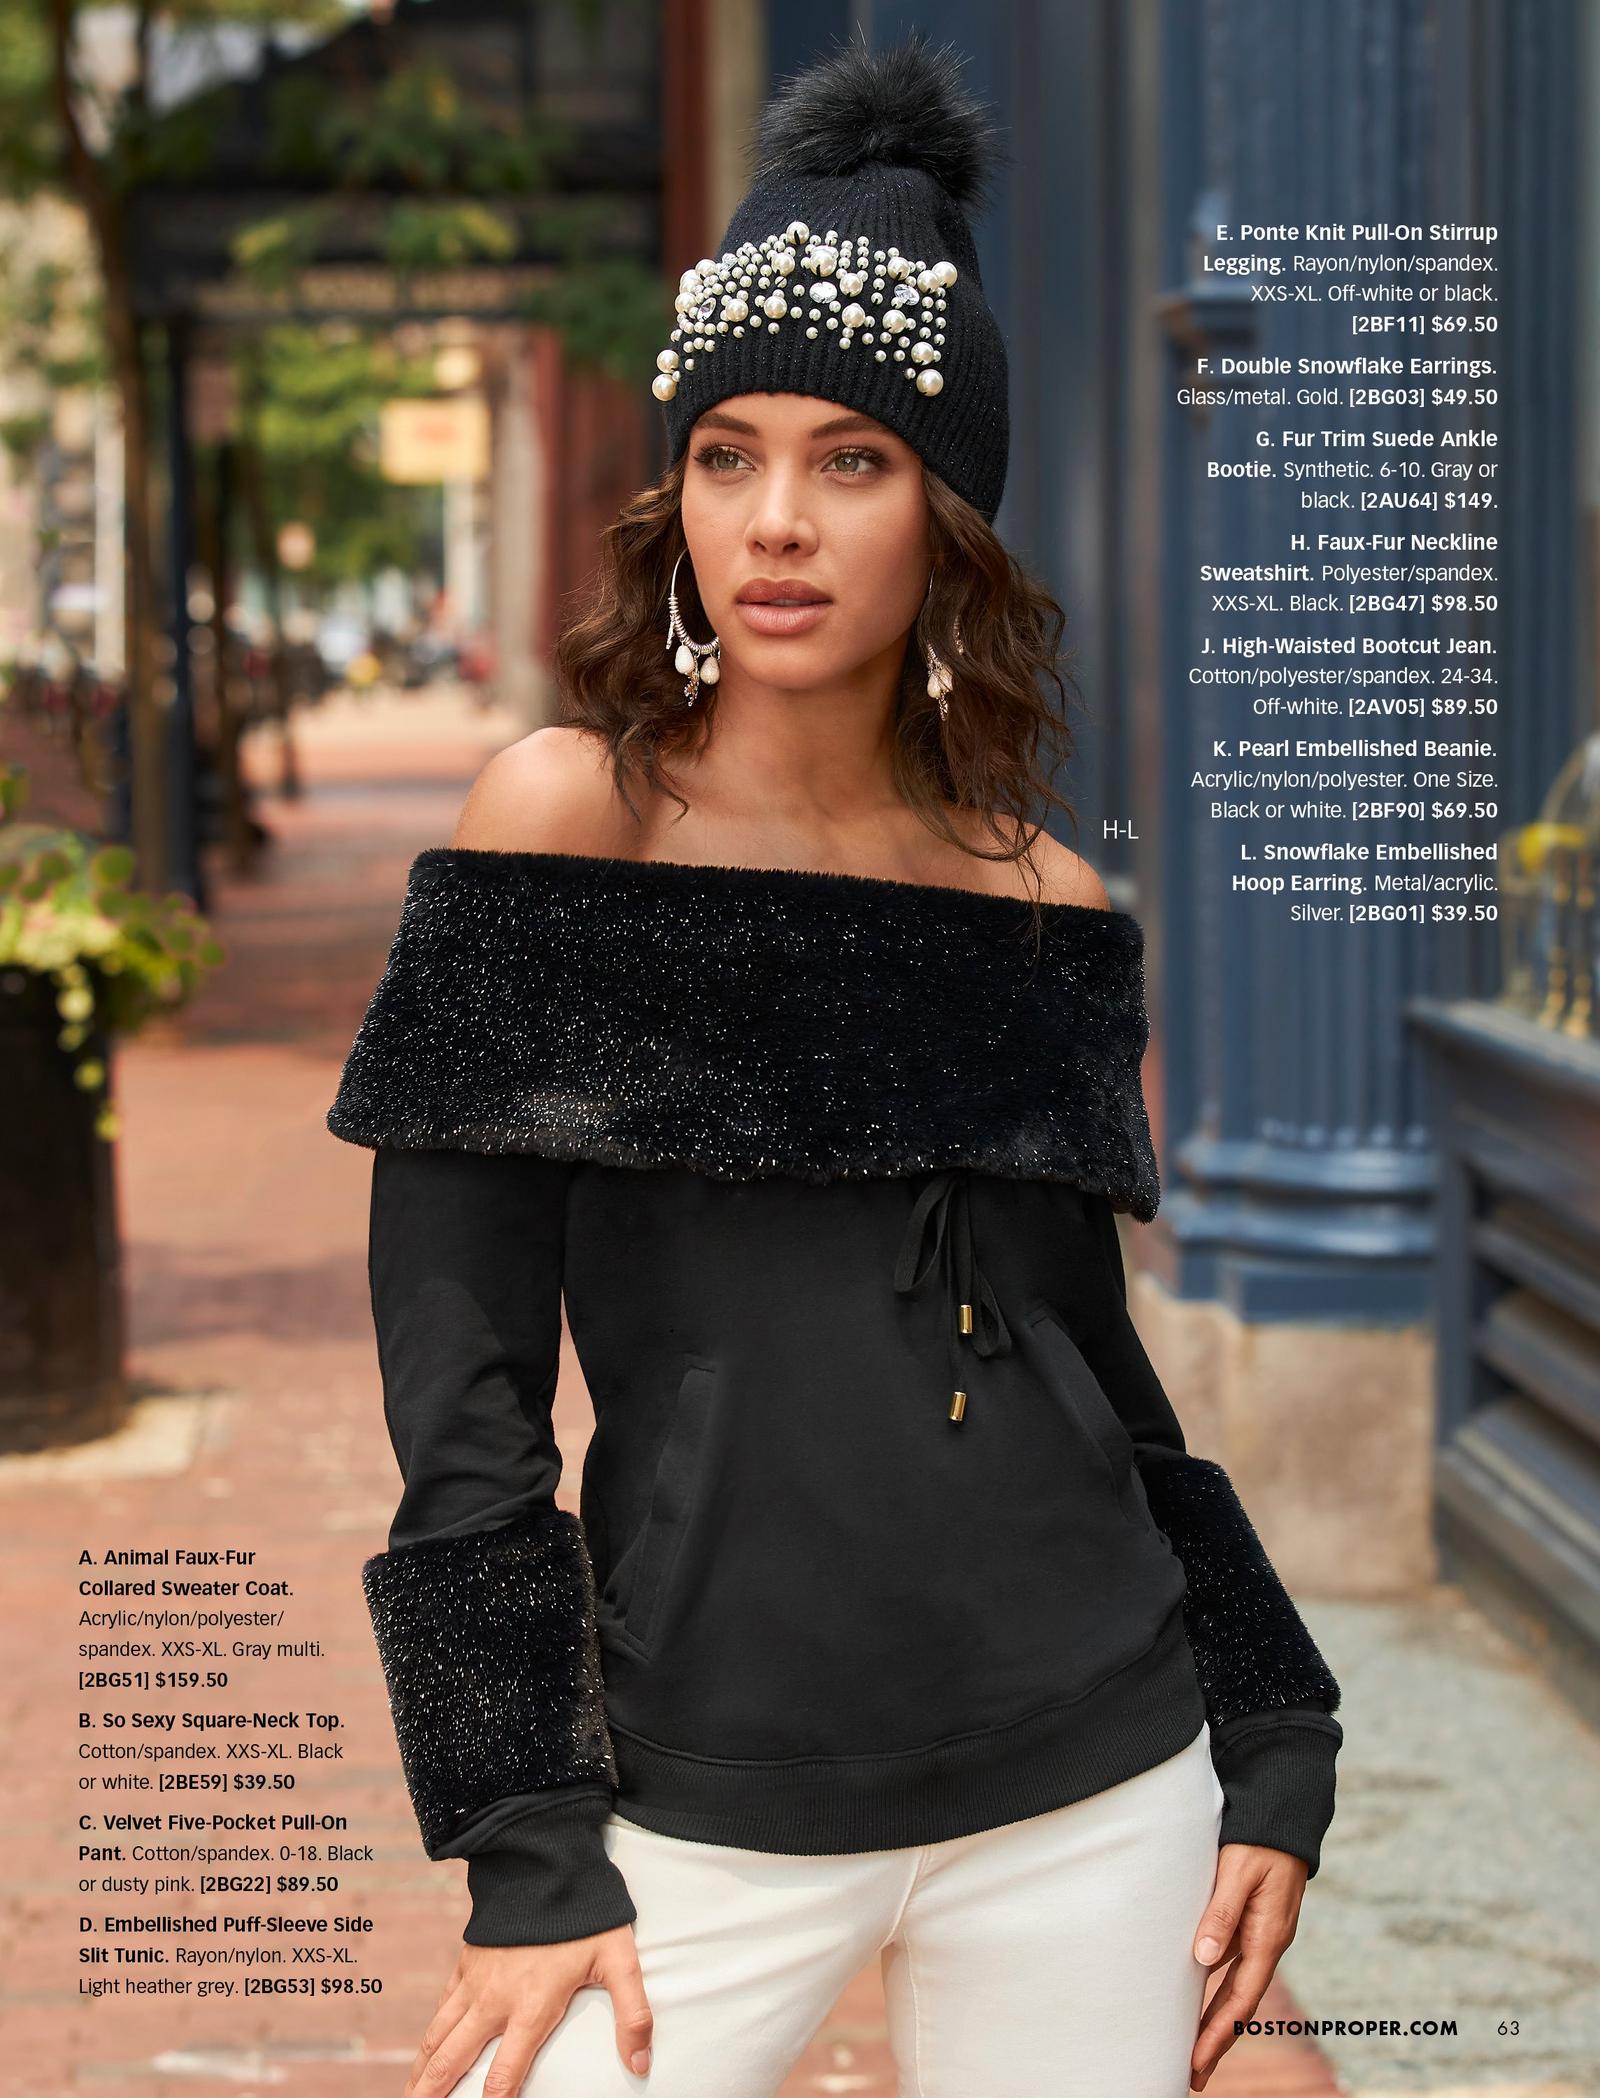 model wearing a black off-the-shoulder shimmer faux fur sweatshirt, black pearl embellished beanie, and white pants.